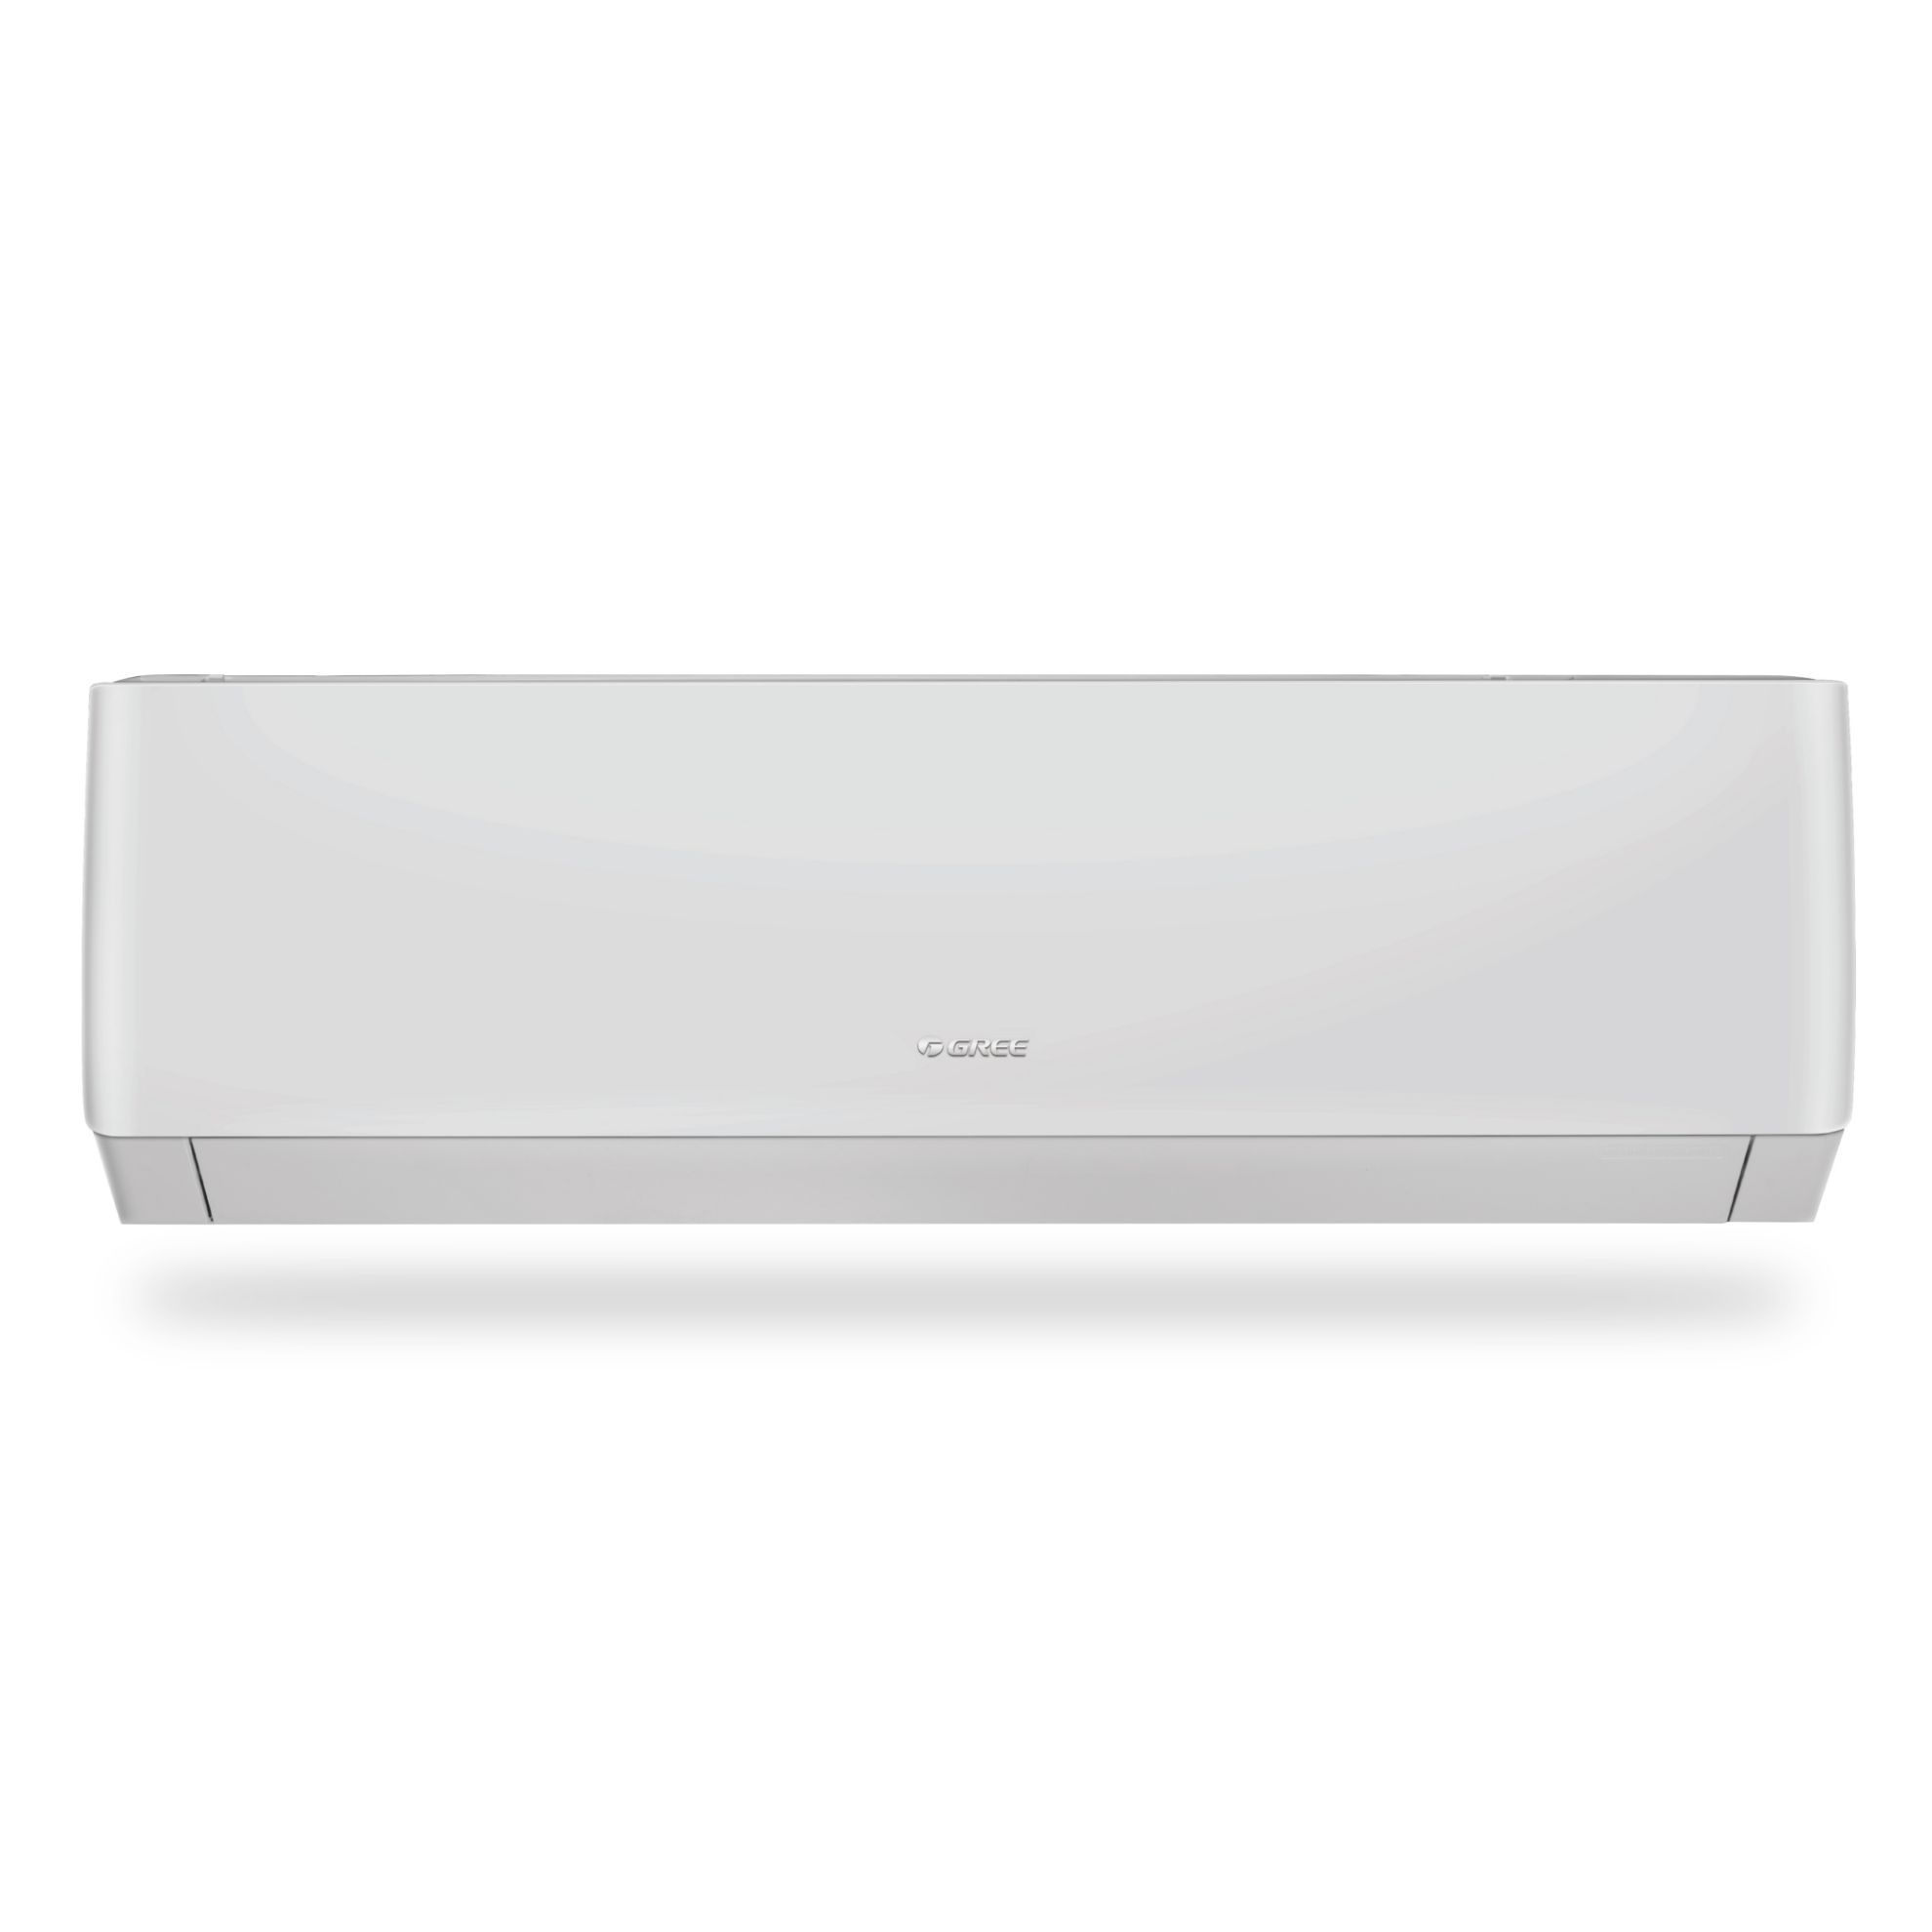 Picture of Gree - P4matic-P24C3 - 2 Ton|Rotary|Wall Split AC